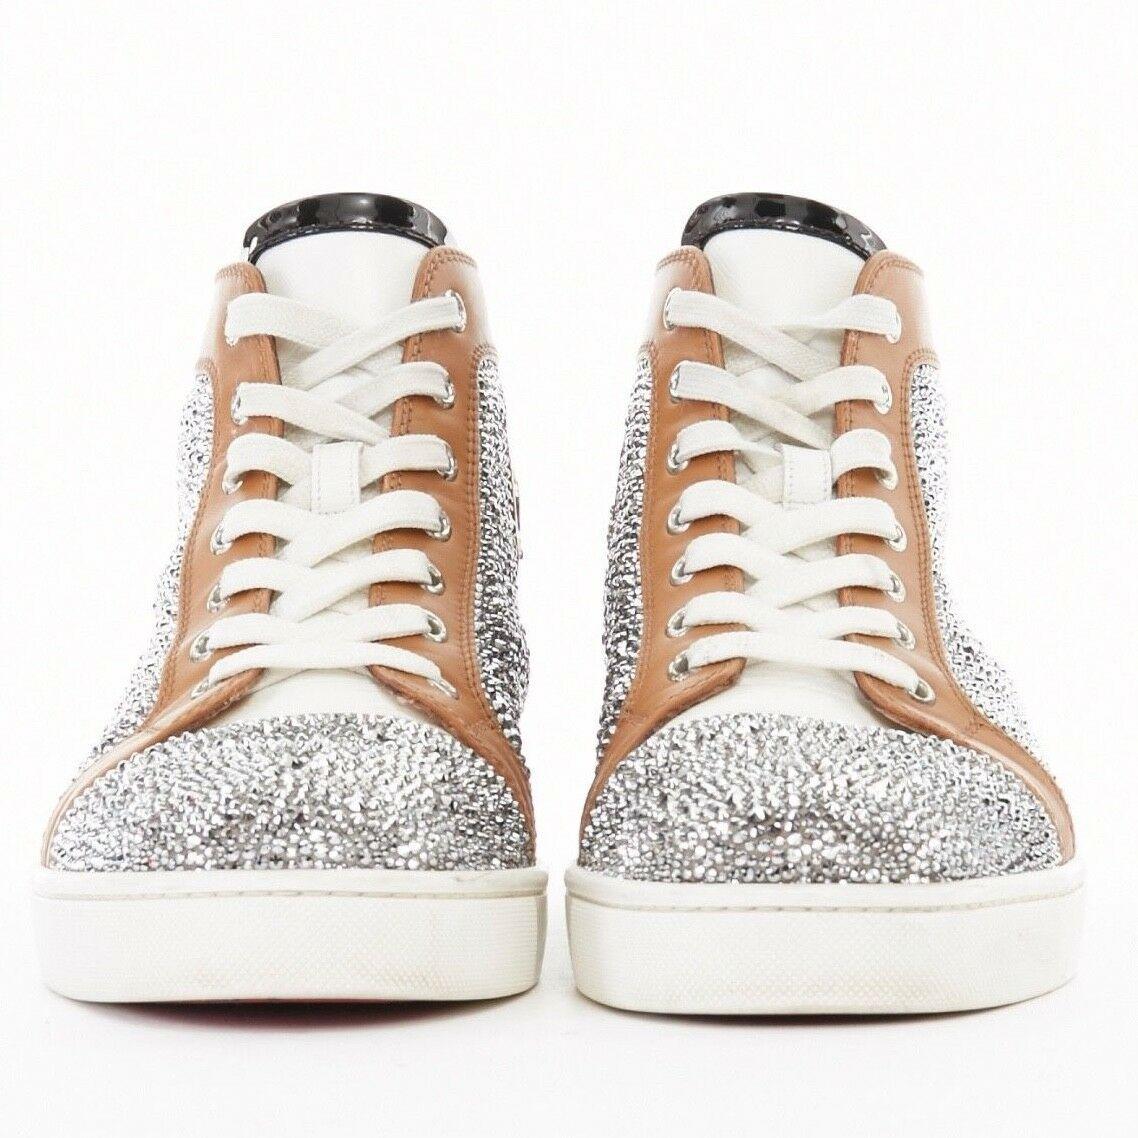 CHRISTIAN LOUBOUTIN Louis flat silver strass crystal high top sneakers EU42 US9

CHRISTIAN LOUBOUTIN
Louis Flat Strass sneakers. Caramel brown and black leather detail. Swavovski crystal strass embellishment on side and at toe. Lace up front. Patent